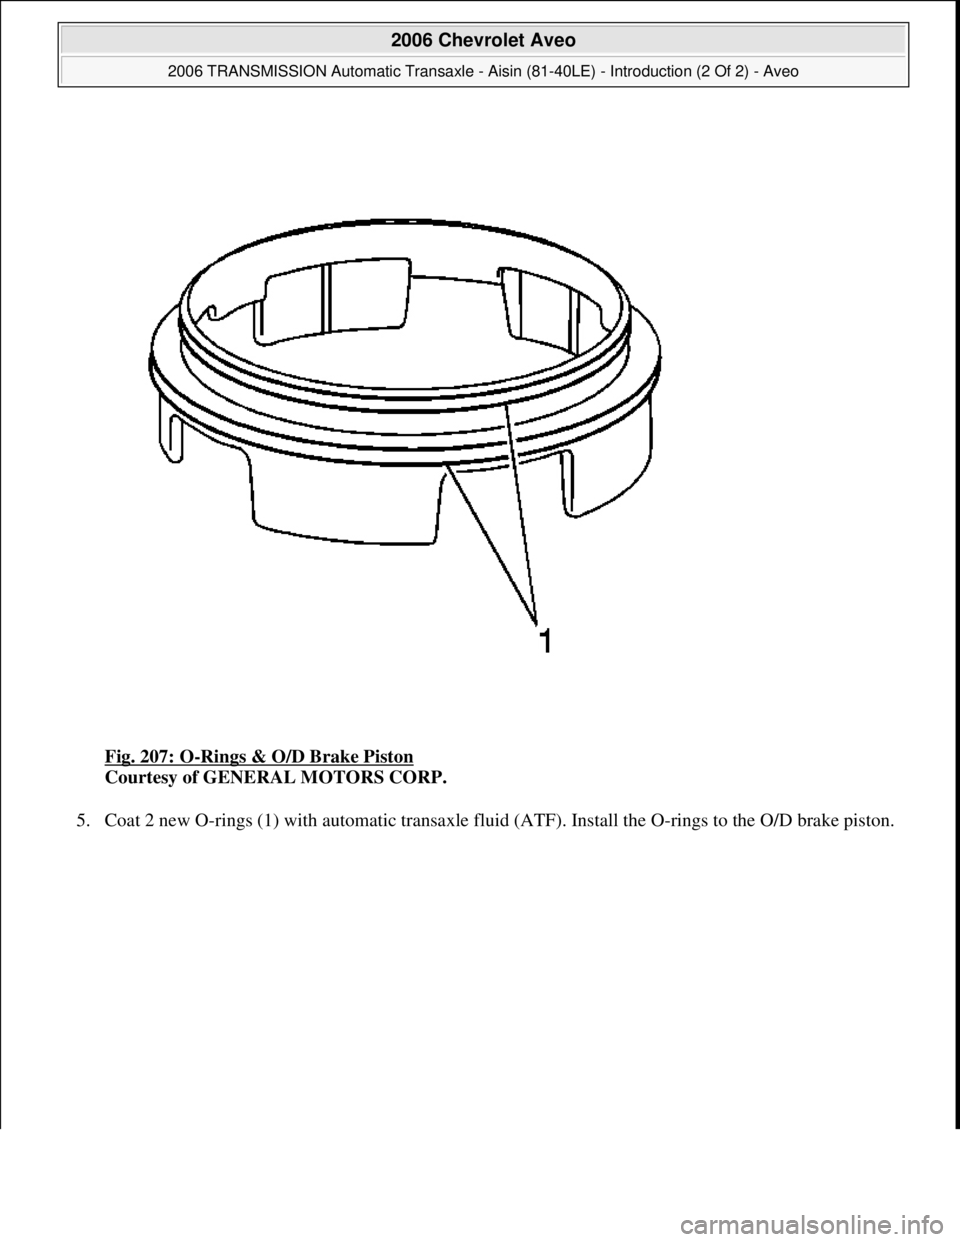 CHEVROLET AVEO 2002  Service Owners Guide Fig. 207: O-Rings & O/D Brake Piston 
Courtesy of GENERAL MOTORS CORP. 
5. Coat 2 new O-rings (1) with automatic transaxle fluid (ATF). Install the O-rings to the O/D brake piston. 
 
2006 Chevrolet A